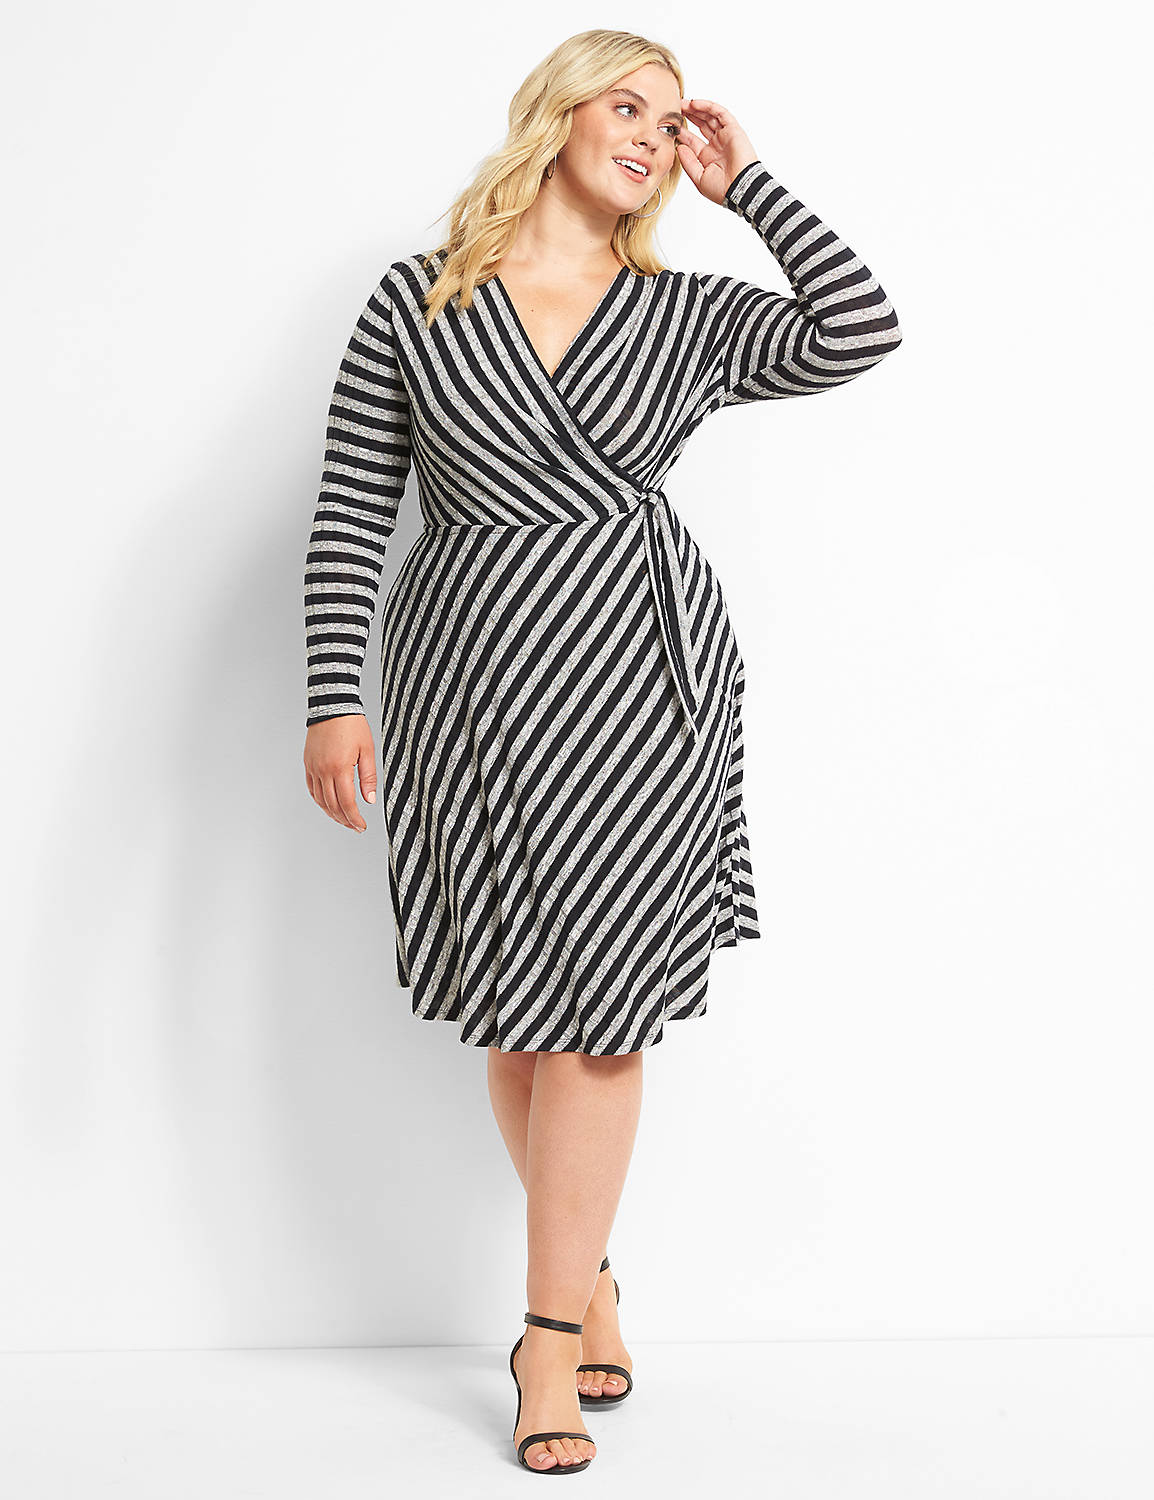 Long Sleeve Surplice Rib Fit and Flare 1122730:LBPS20153_BaileyStripe_colorway1:18/20 Product Image 1